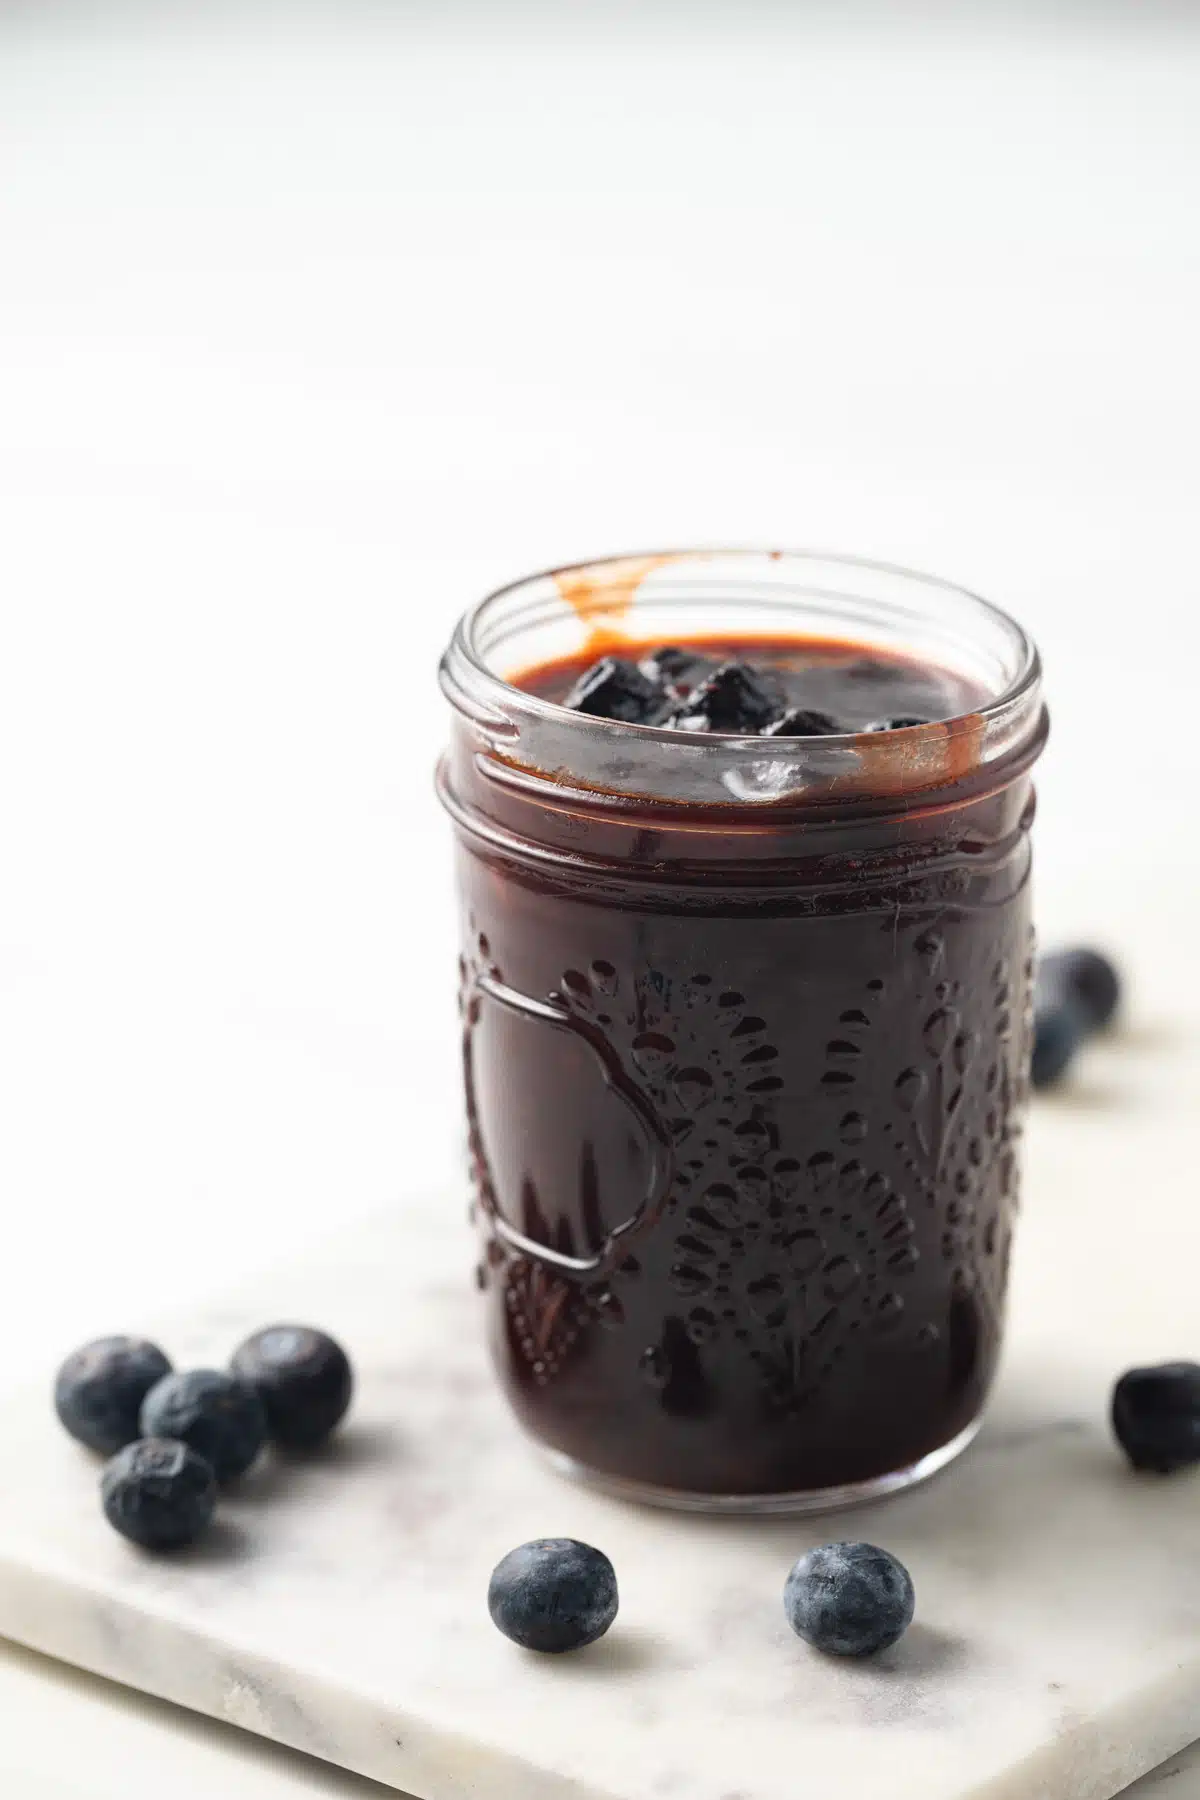 Side view of blueberry BBQ sauce in a jar.